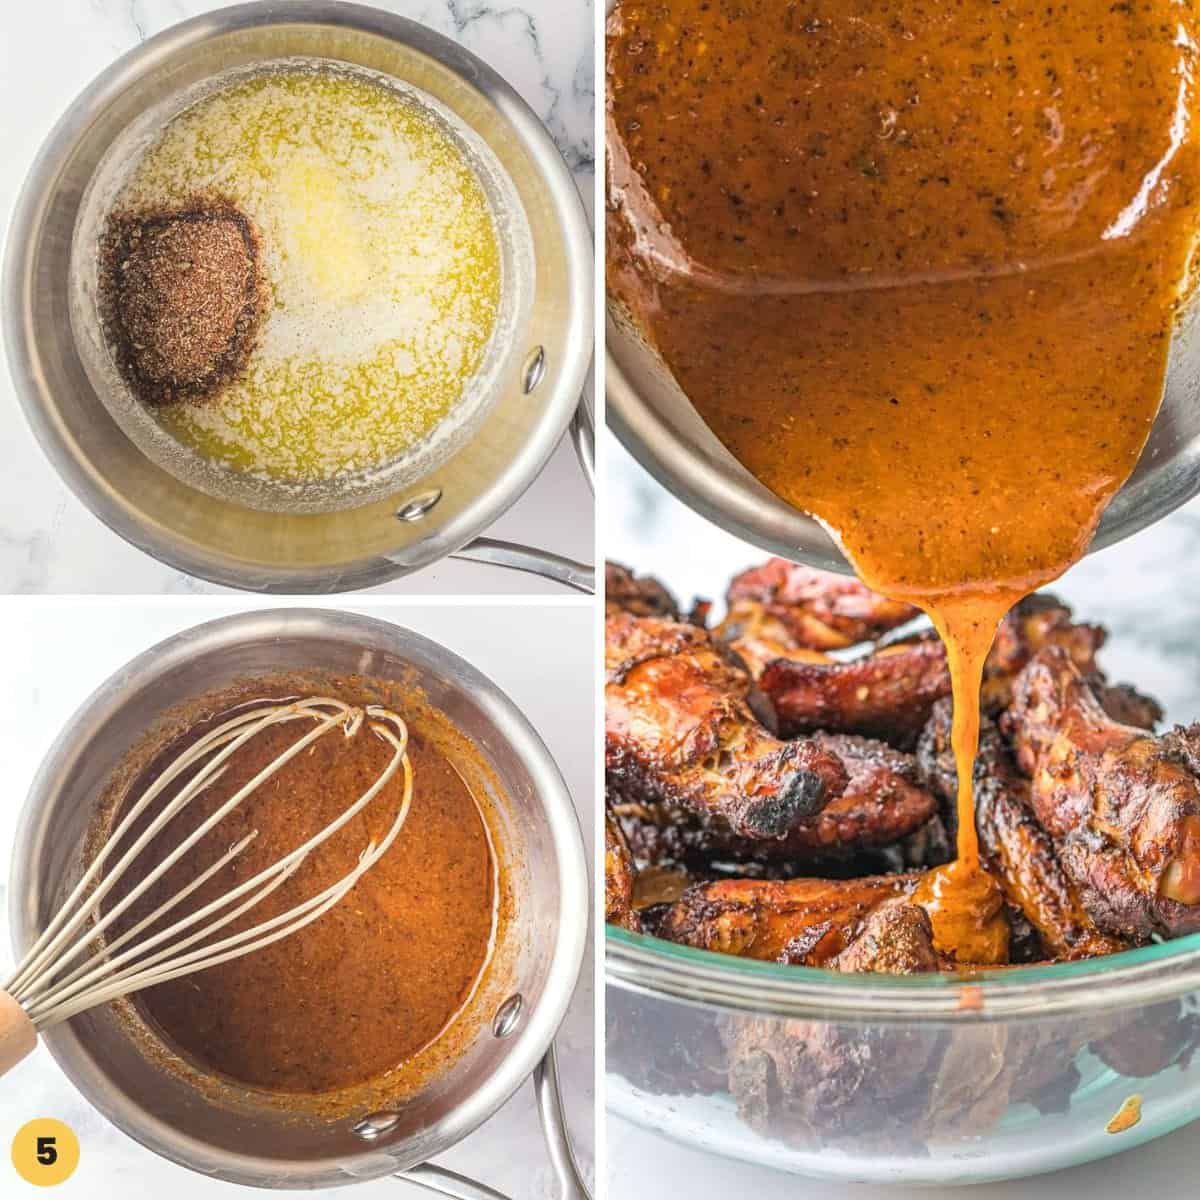 Collage of 3 images showing how to make a sauce and add it to smoked chicken wings